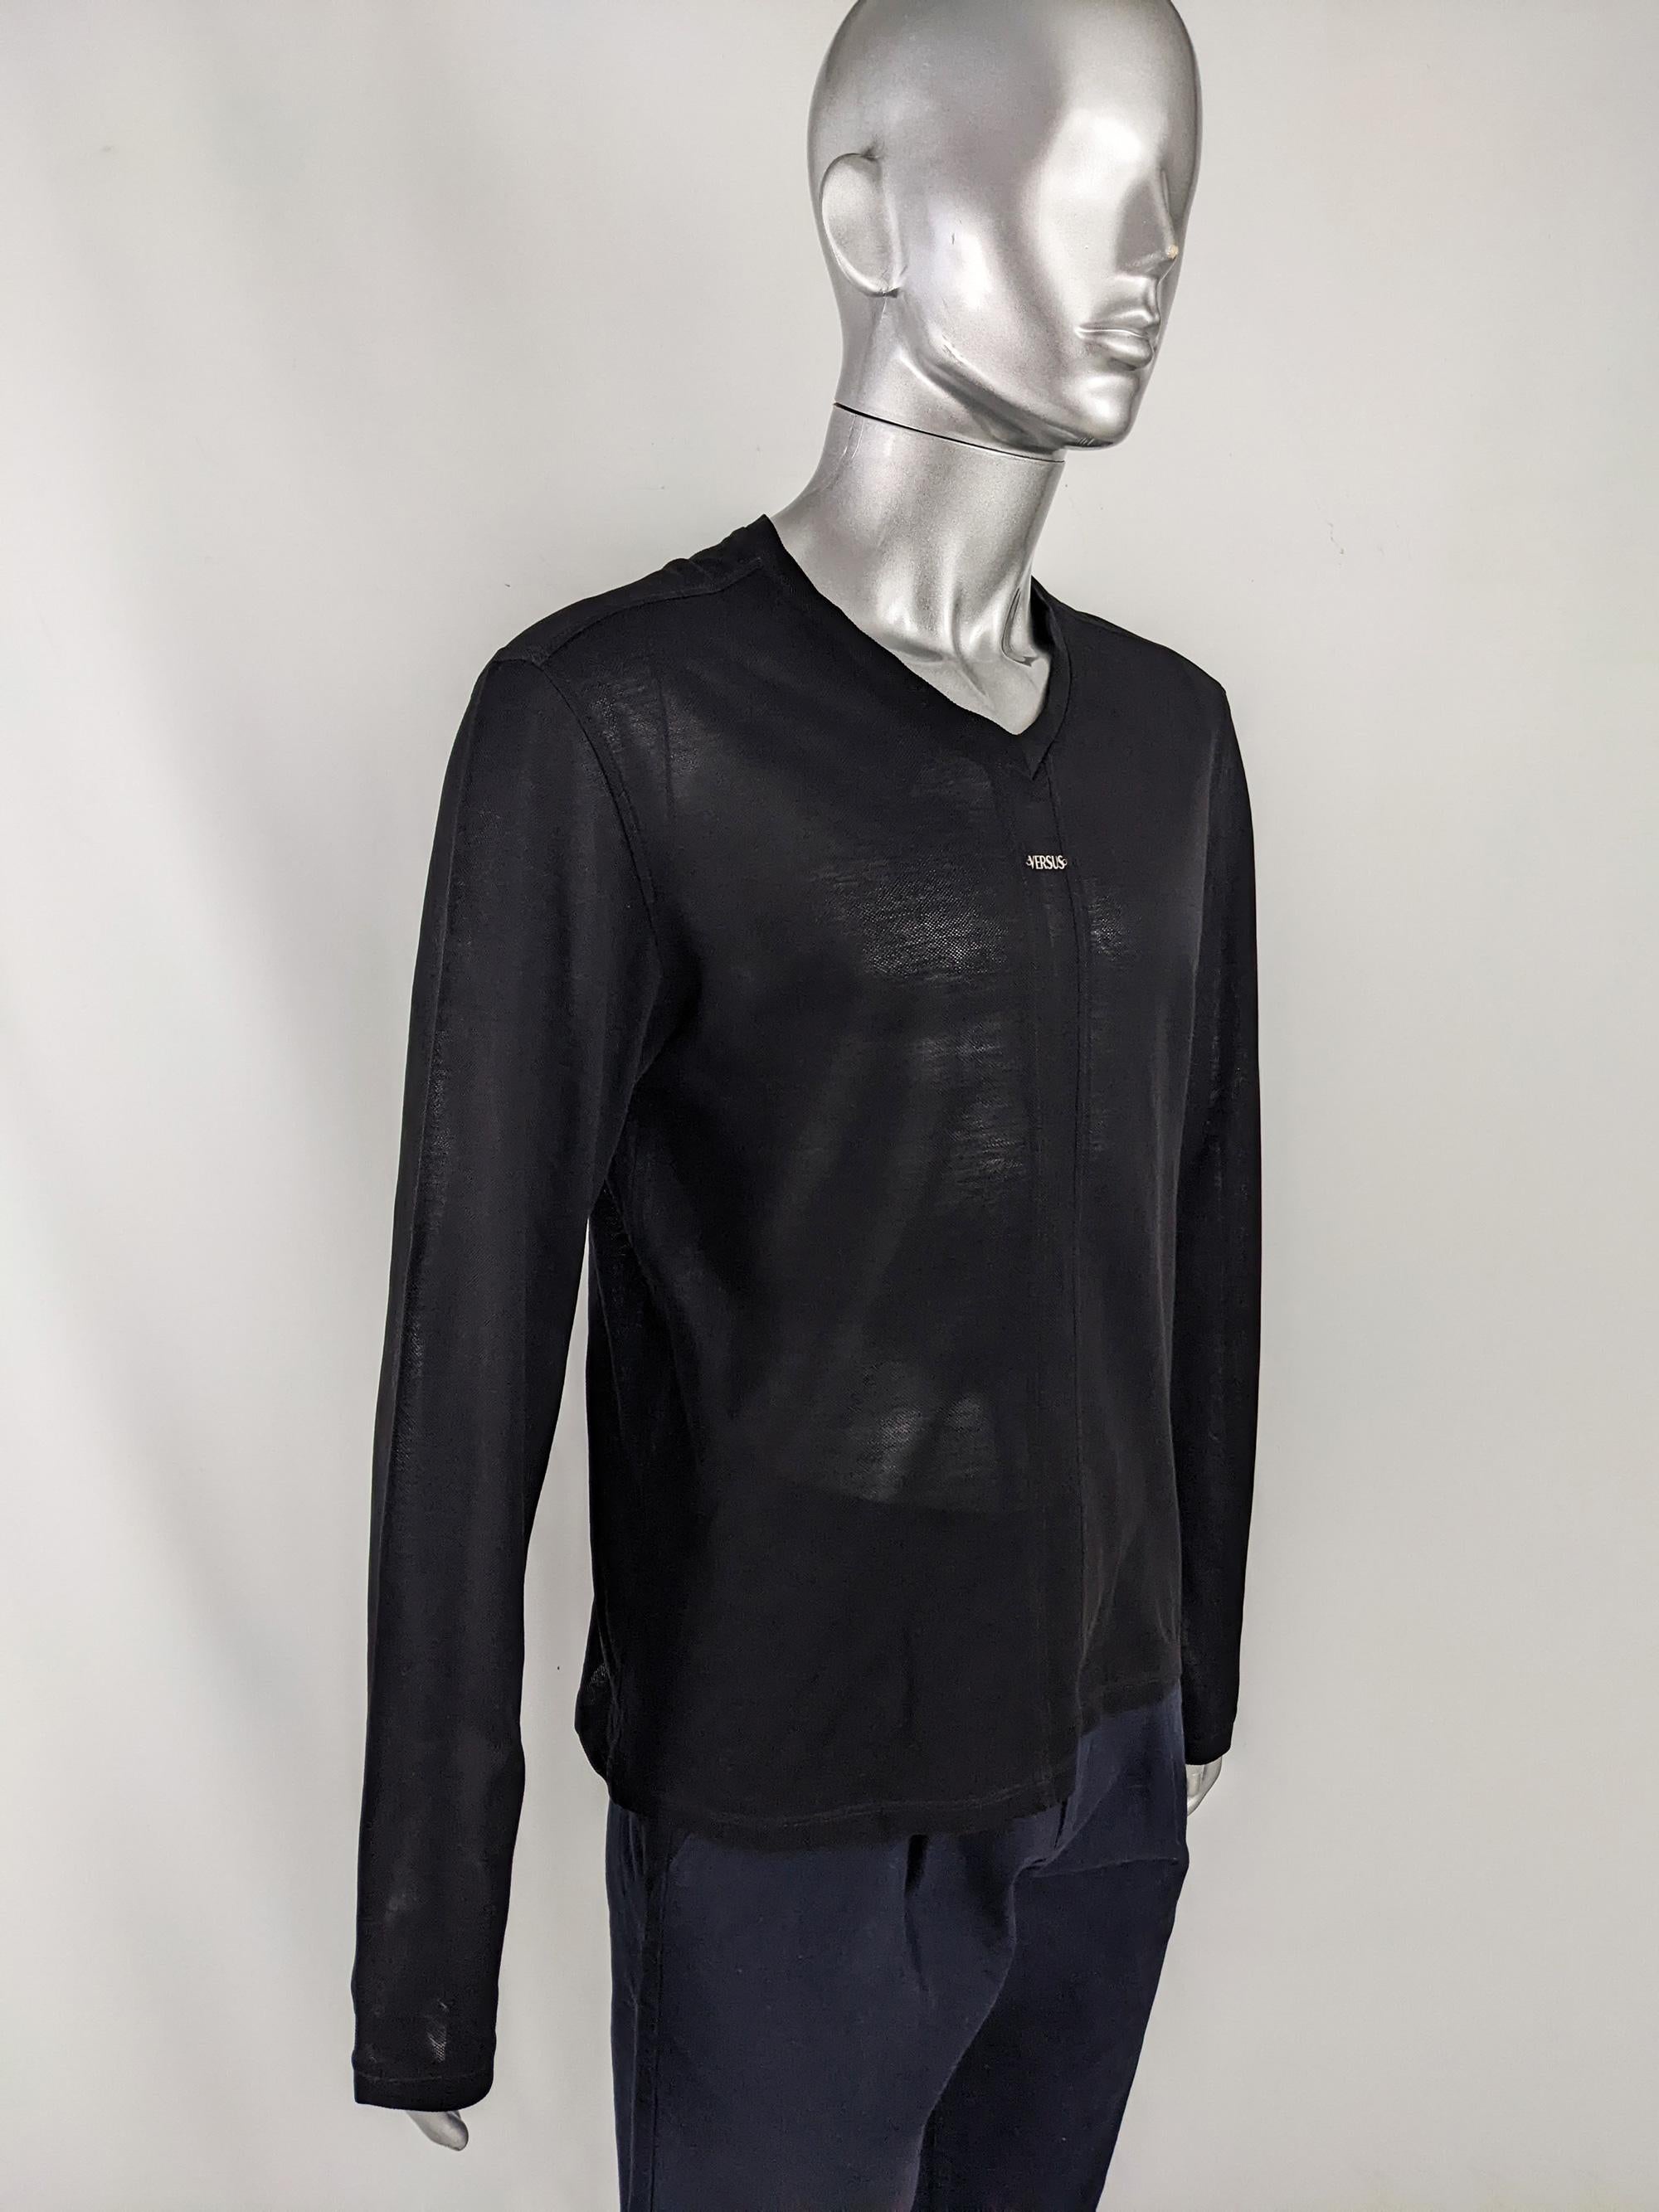 Versus Versace Vintage 2000s Black Mesh Shirt Long Sleeve Top Y2K Party Shirt In Good Condition For Sale In Doncaster, South Yorkshire